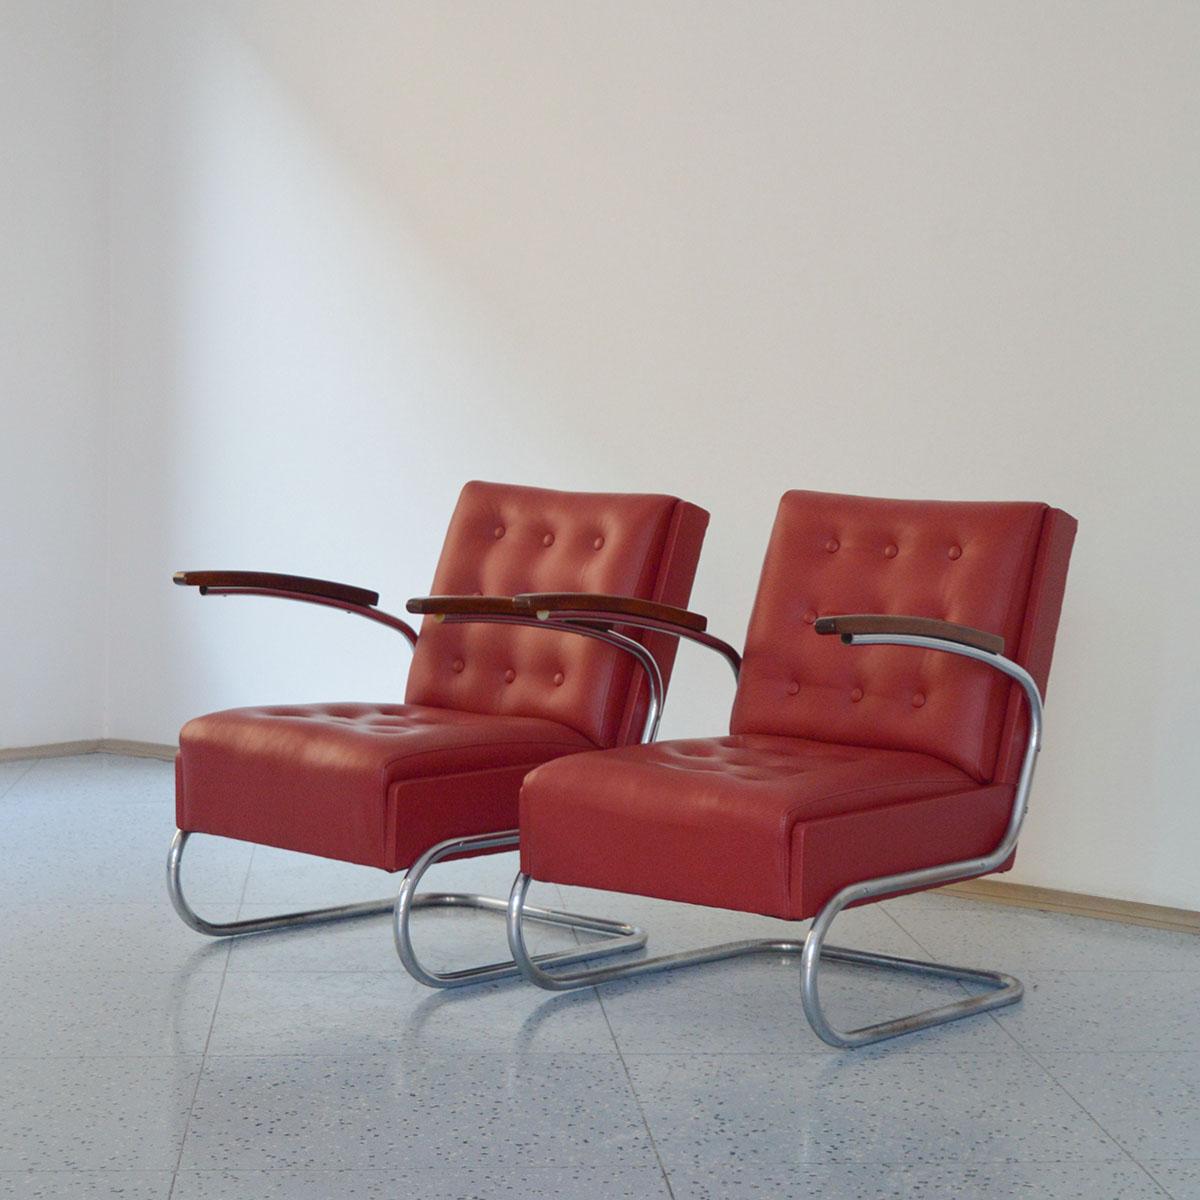 Pair of Bauhaus chrome-plated tubular steel cantilever armchairs in Leather, model S411, designed by the Dutch industrial designer Willem Hendrik Gispen and manufactured by Mücke & Melder in Germany, 1930s.

The iconic S411 cantilever armchair is